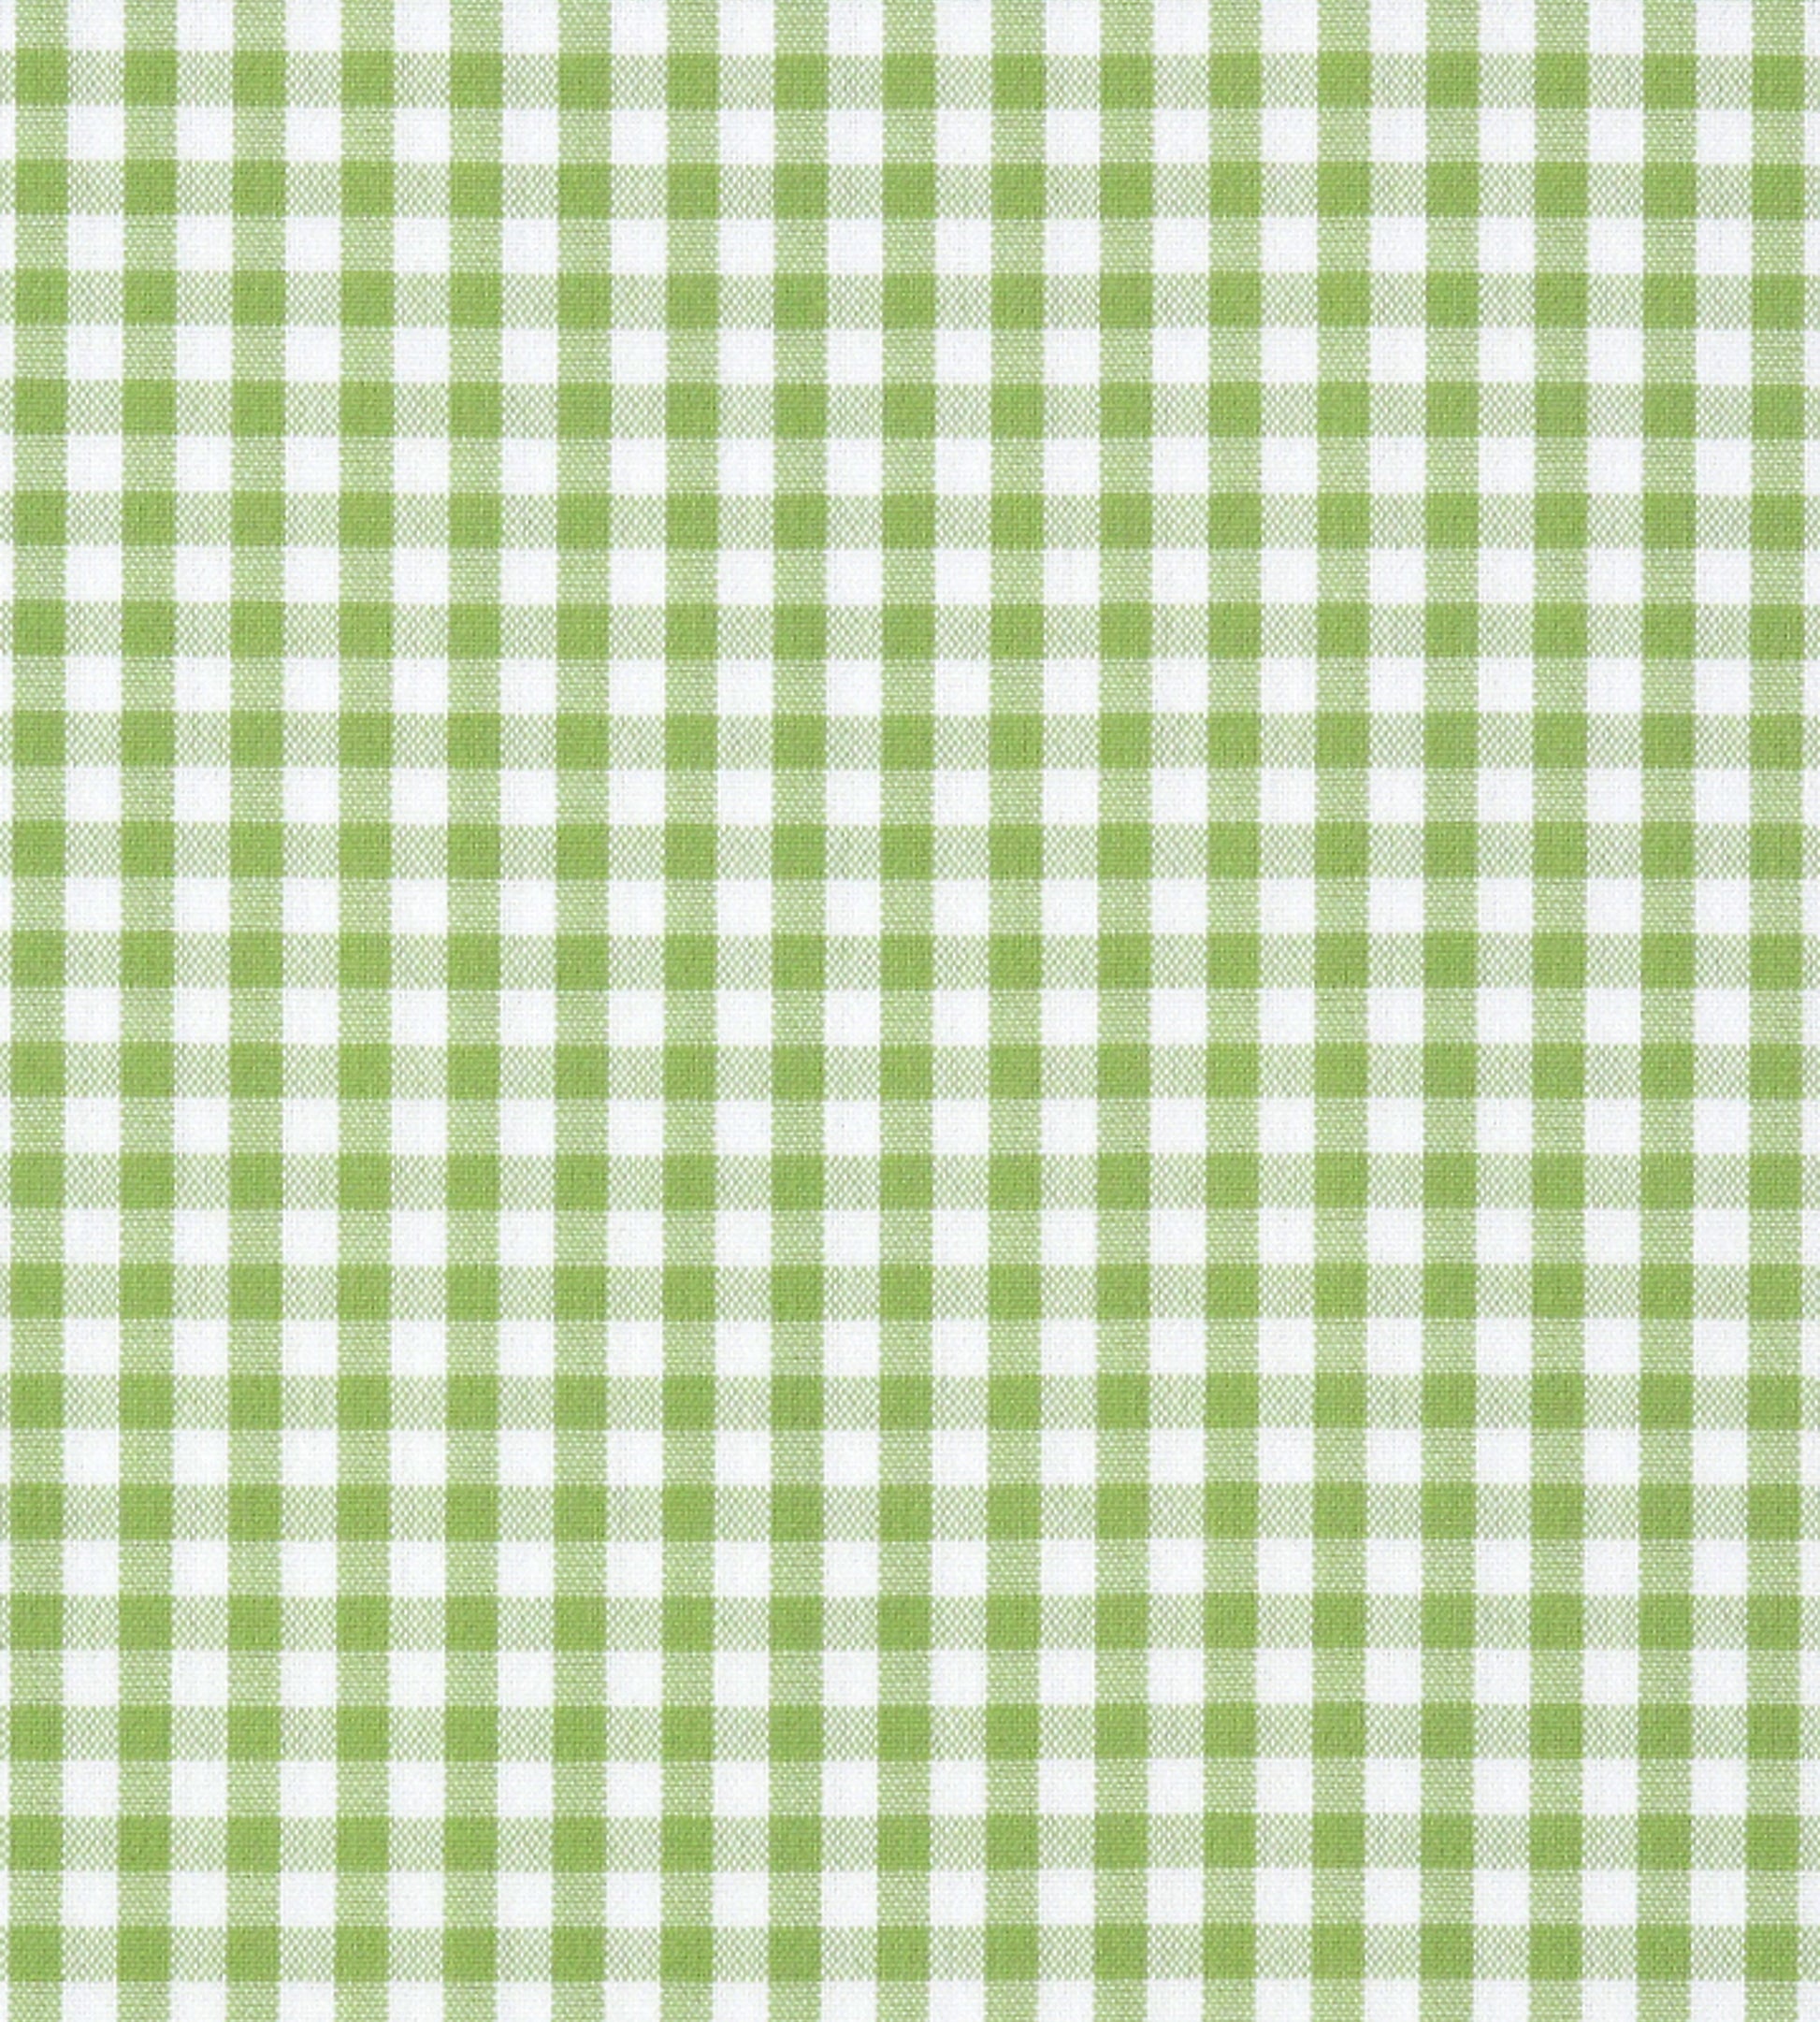 Purchase Old World Weavers Fabric Product F3 00043018, Poker Check Lime 1